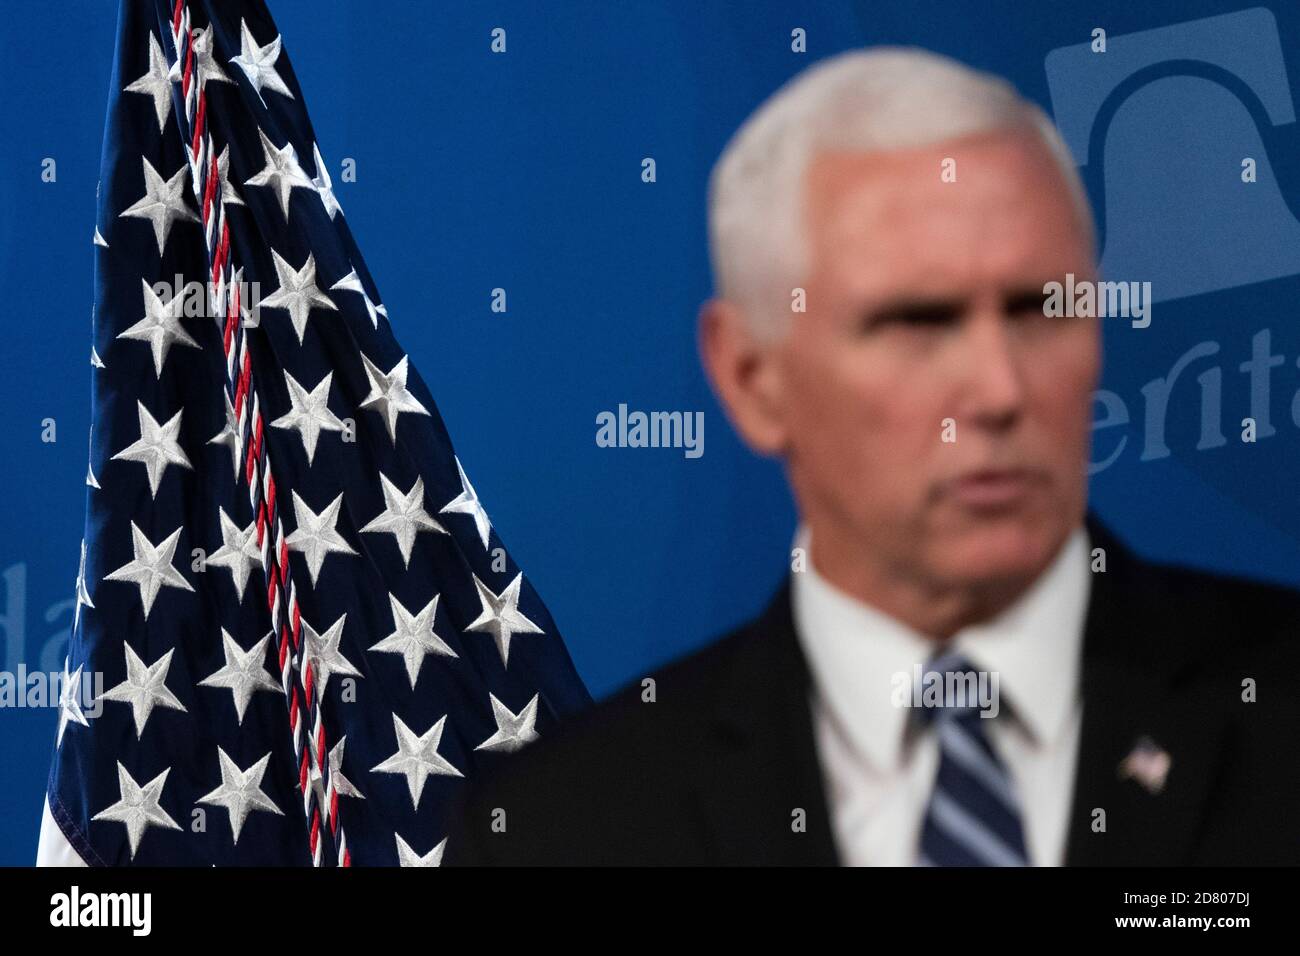 US Vice President Mike Pence speaks at the Heritage Foundation on Tuesday, September 17, 2019 in Washington, D.C. Pence spoke about the importance of the USMCA trade agreement and its impact on American prosperity. Credit: Alex Edelman/The Photo Access Stock Photo